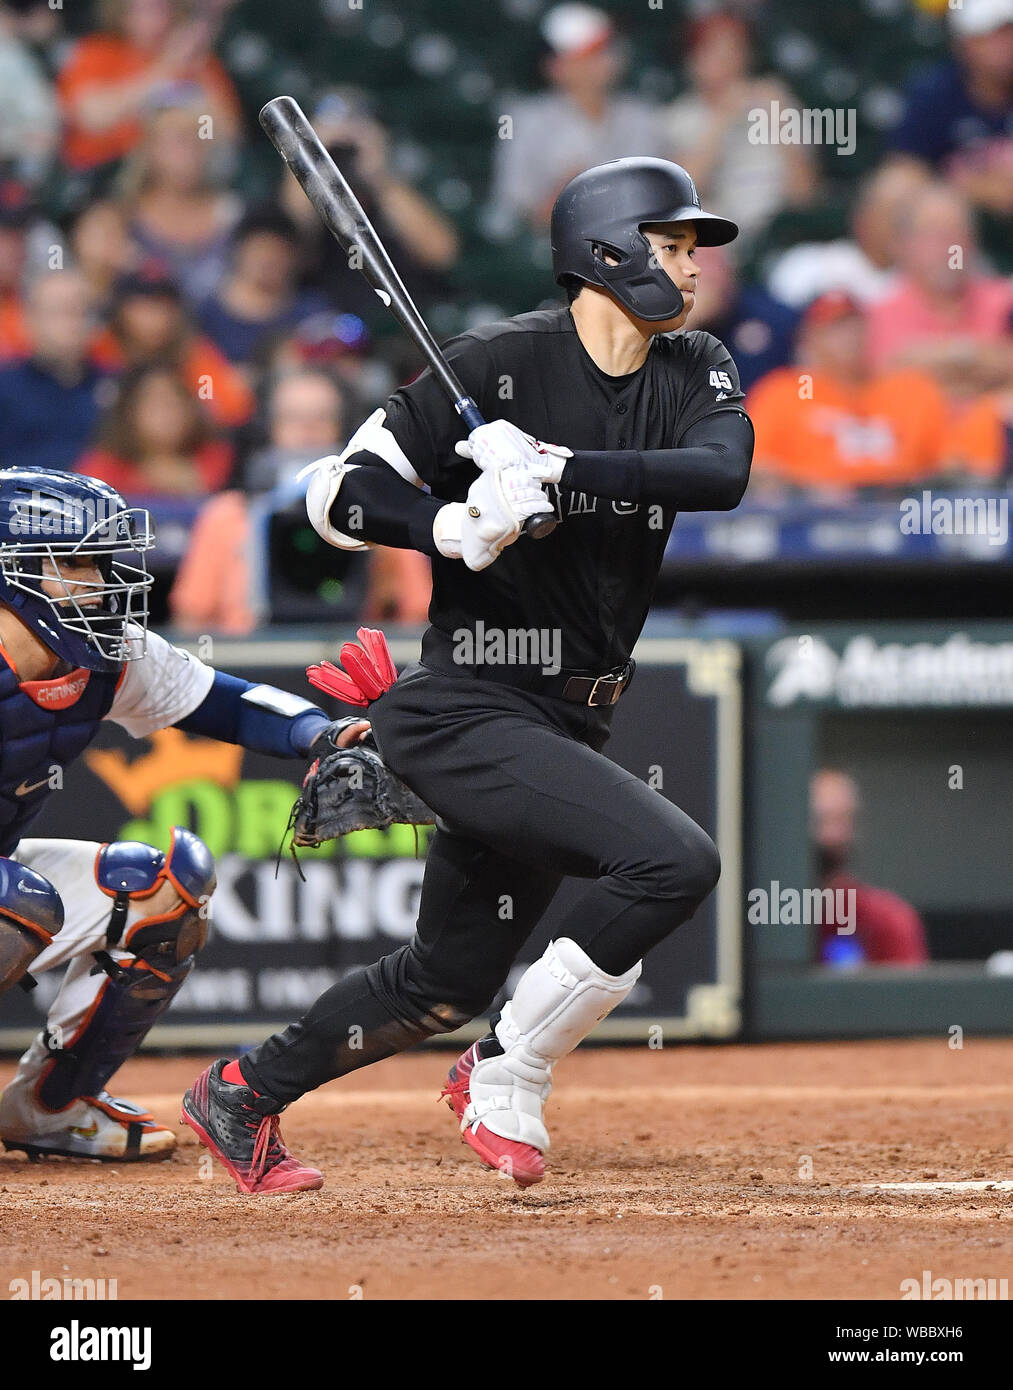 Shohei Ohtani of the Los Angeles Angels bats against the Houston Astros  during the Major League Baseball game at Minute Maid Park in Houston,  United States, August 24, 2019. MLB Players' Weekend